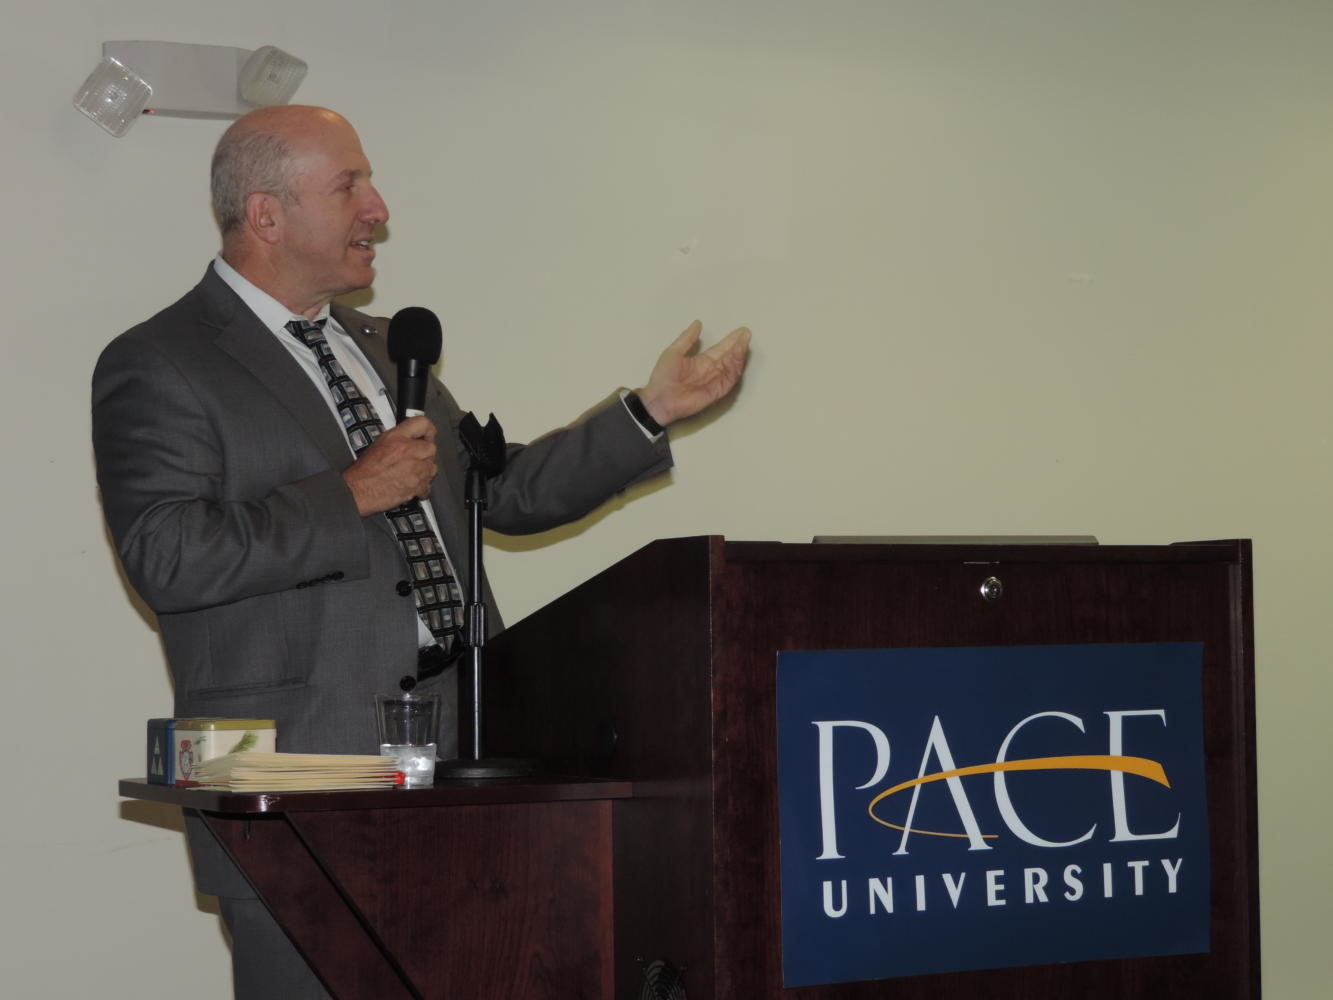 President Krislov greets the Pace community. Photo by Emily Bresnahan